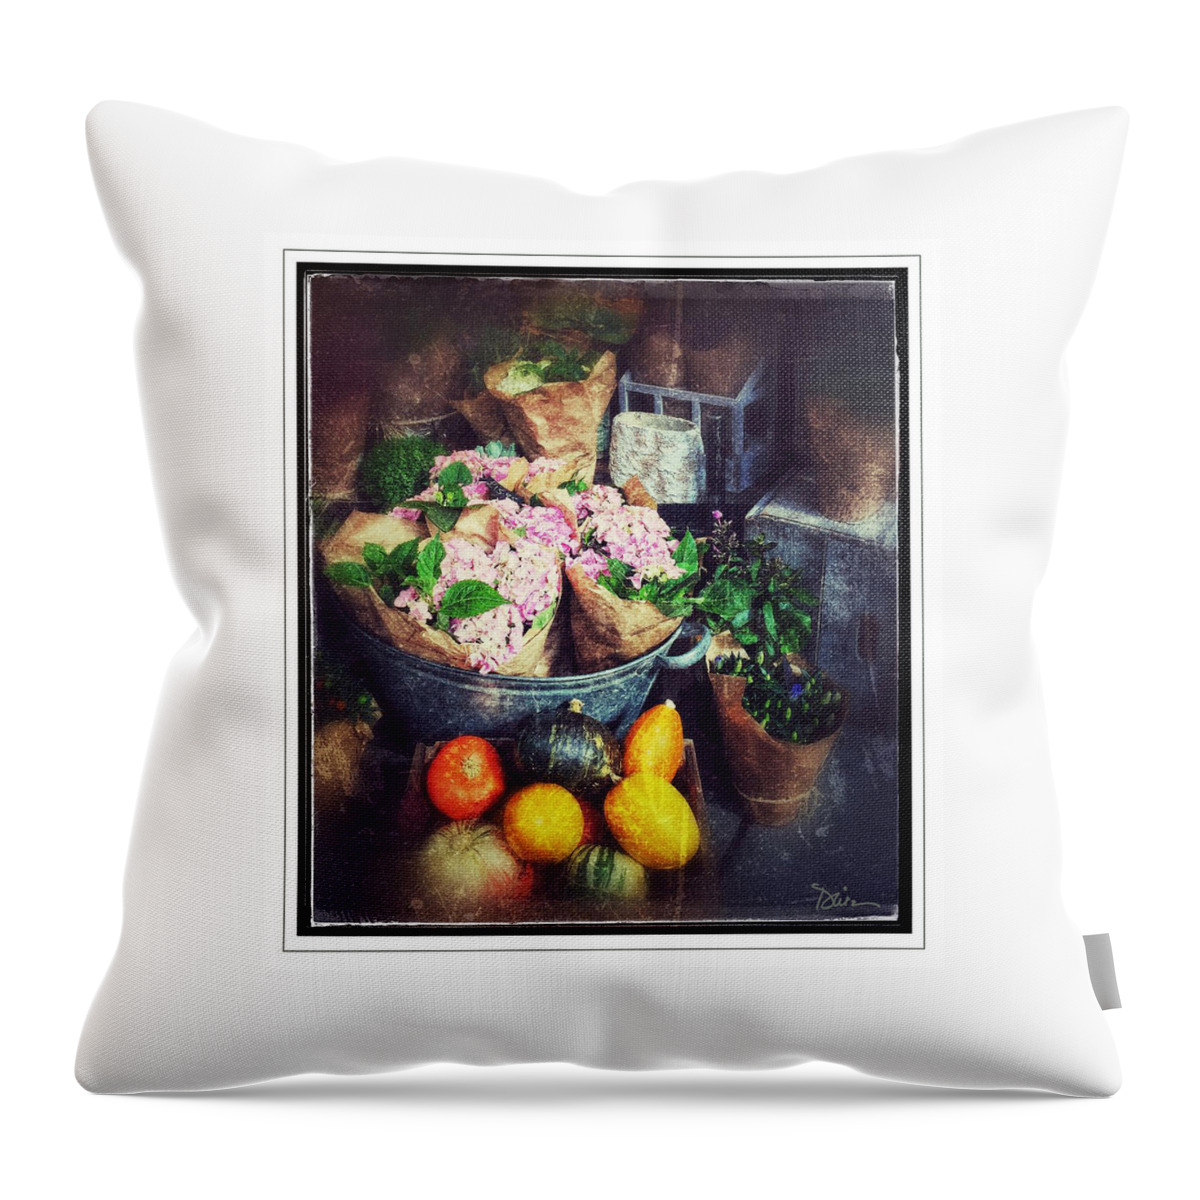 Fresh Produce Throw Pillow featuring the photograph On Display by Peggy Dietz